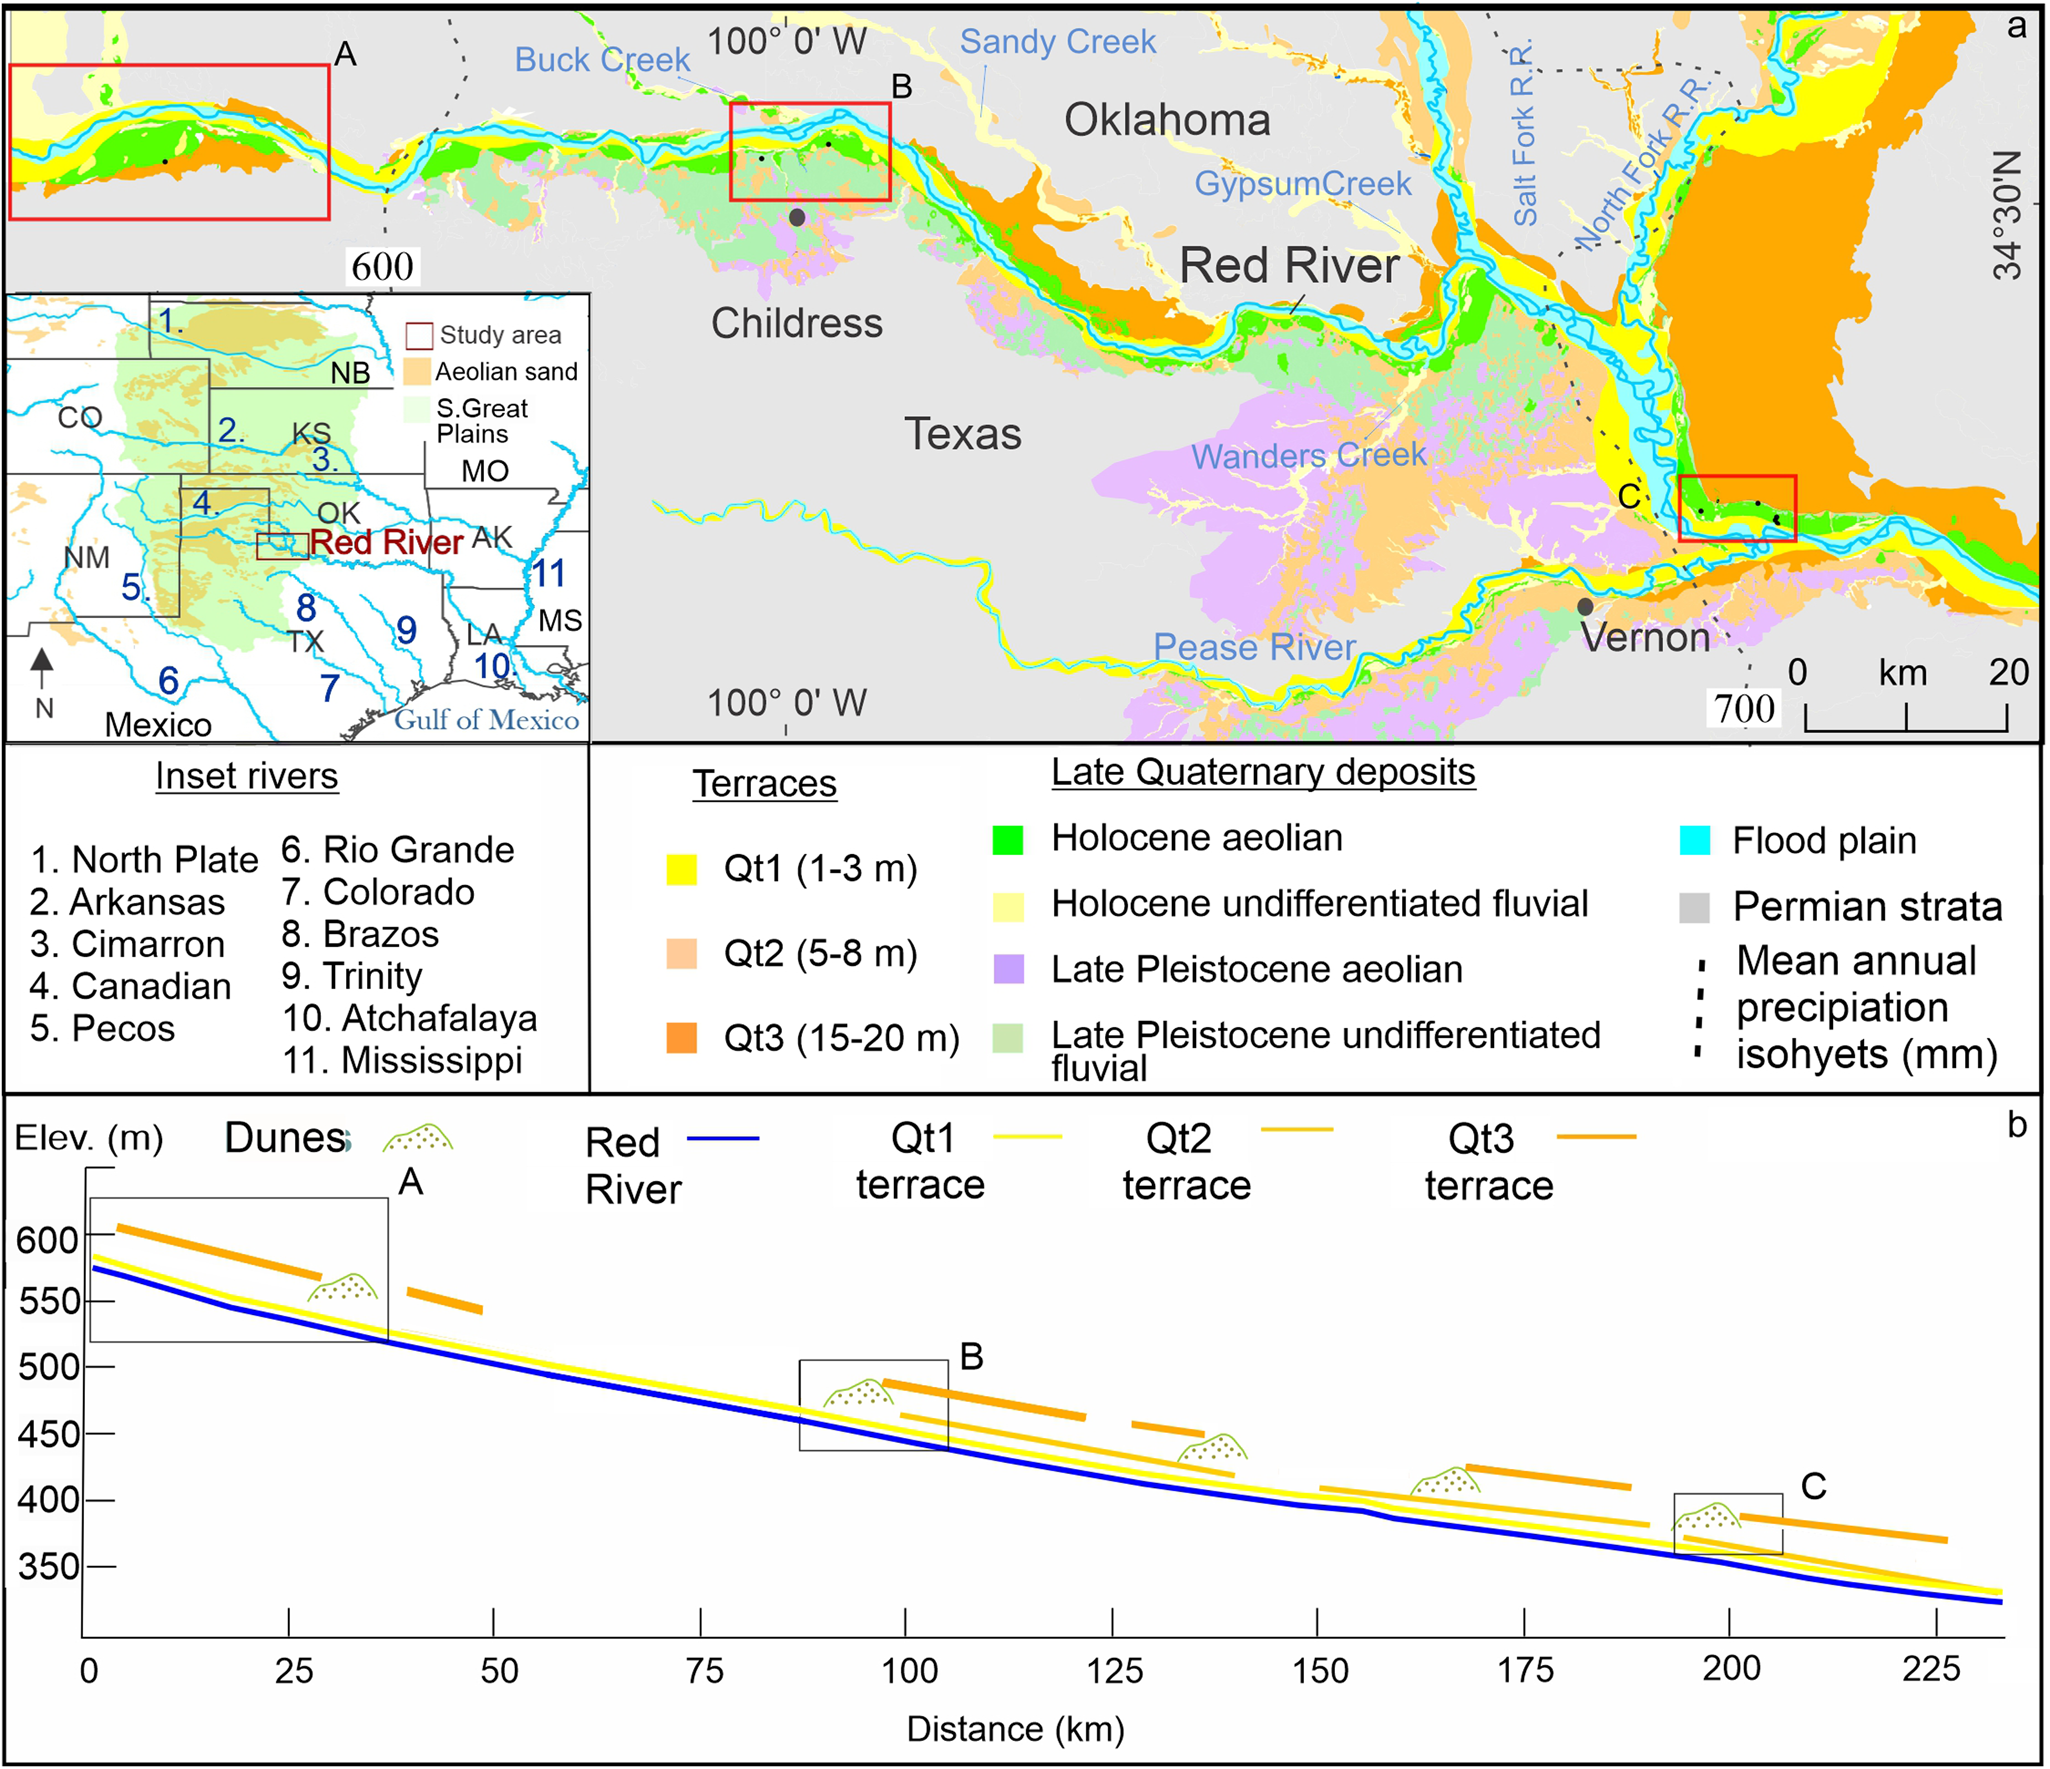 Late Quaternary fluvial and aeolian depositional environments for